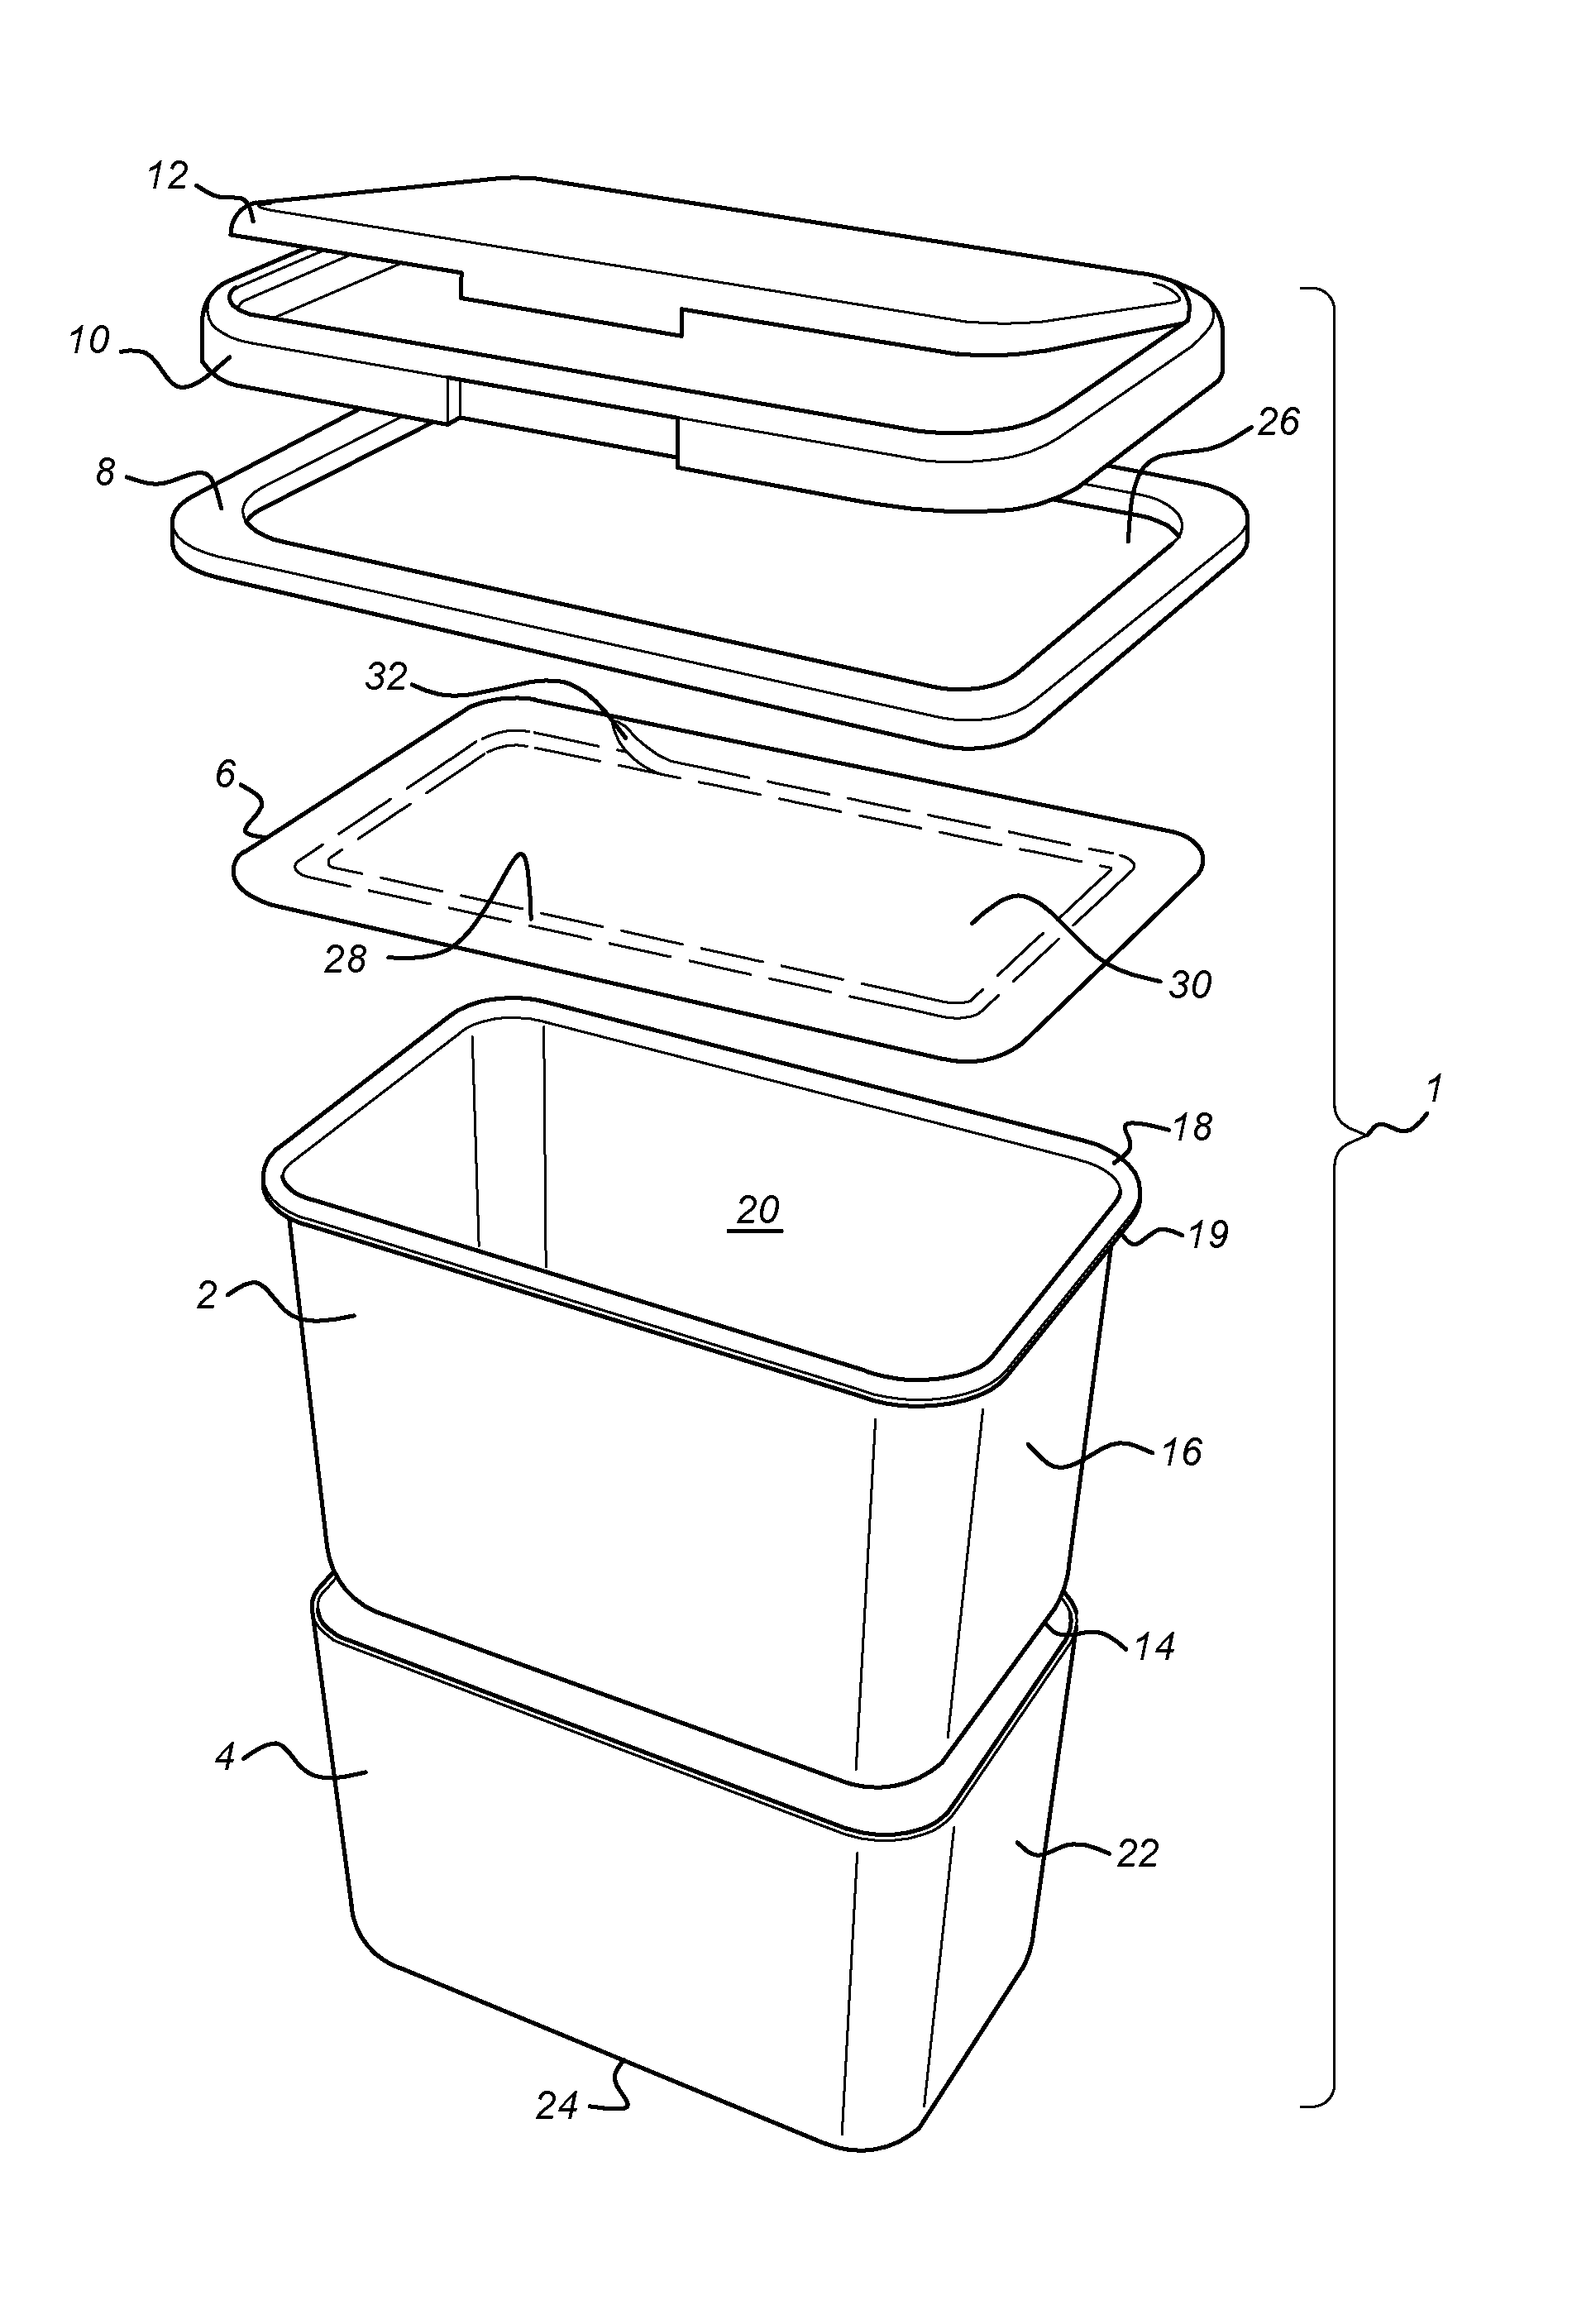 Thermoformed container with lid